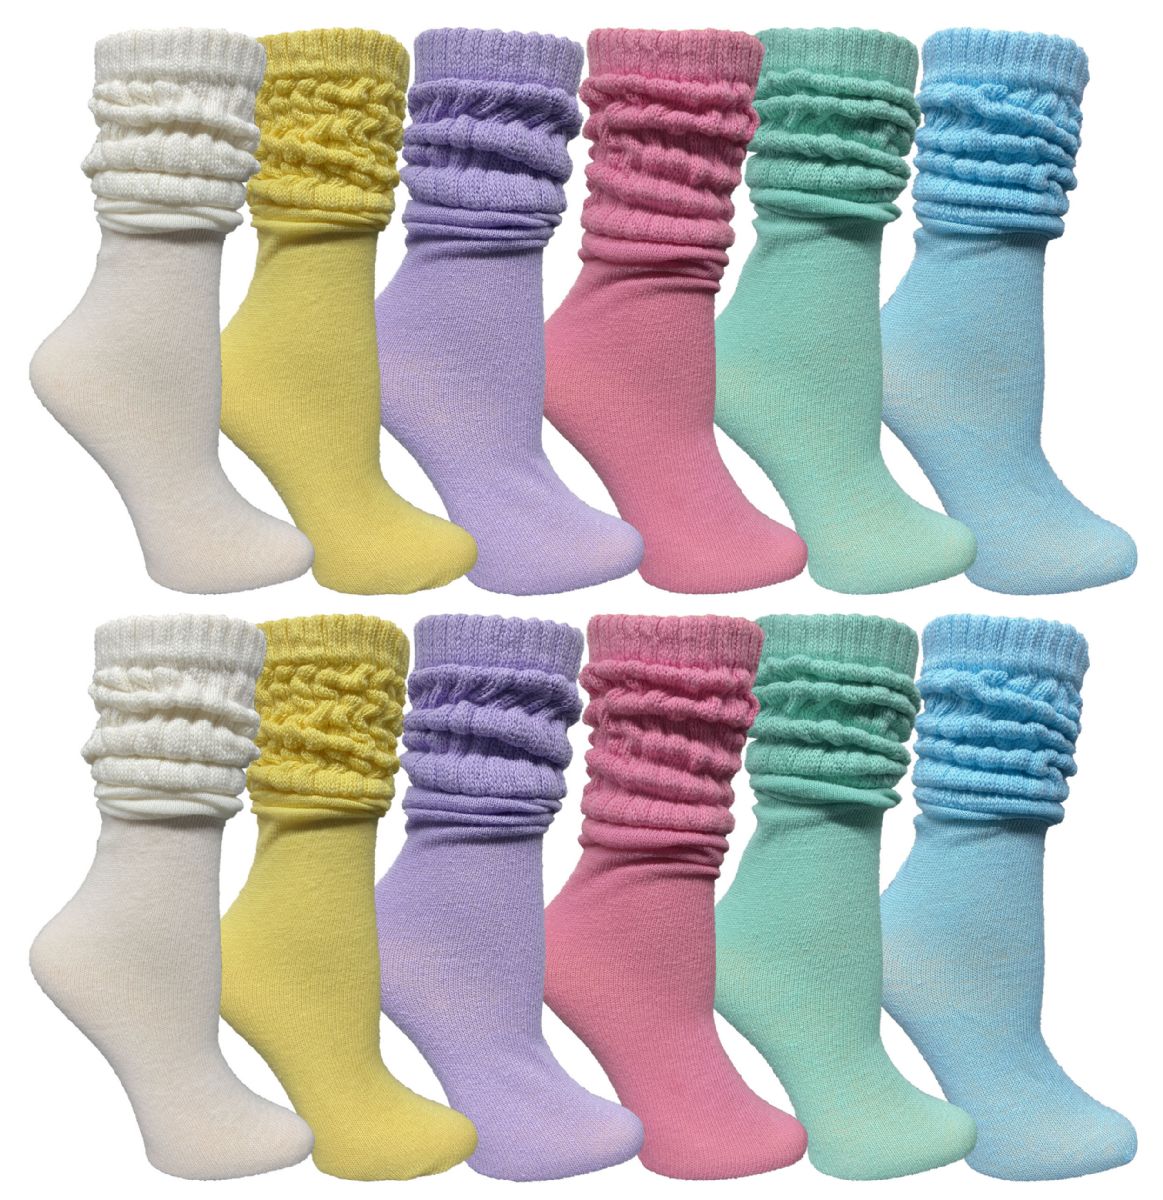 24 Pairs of Yacht & Smith Slouch Socks For Women, Assorted Pastel Size 9-11 - Womens Crew Sock